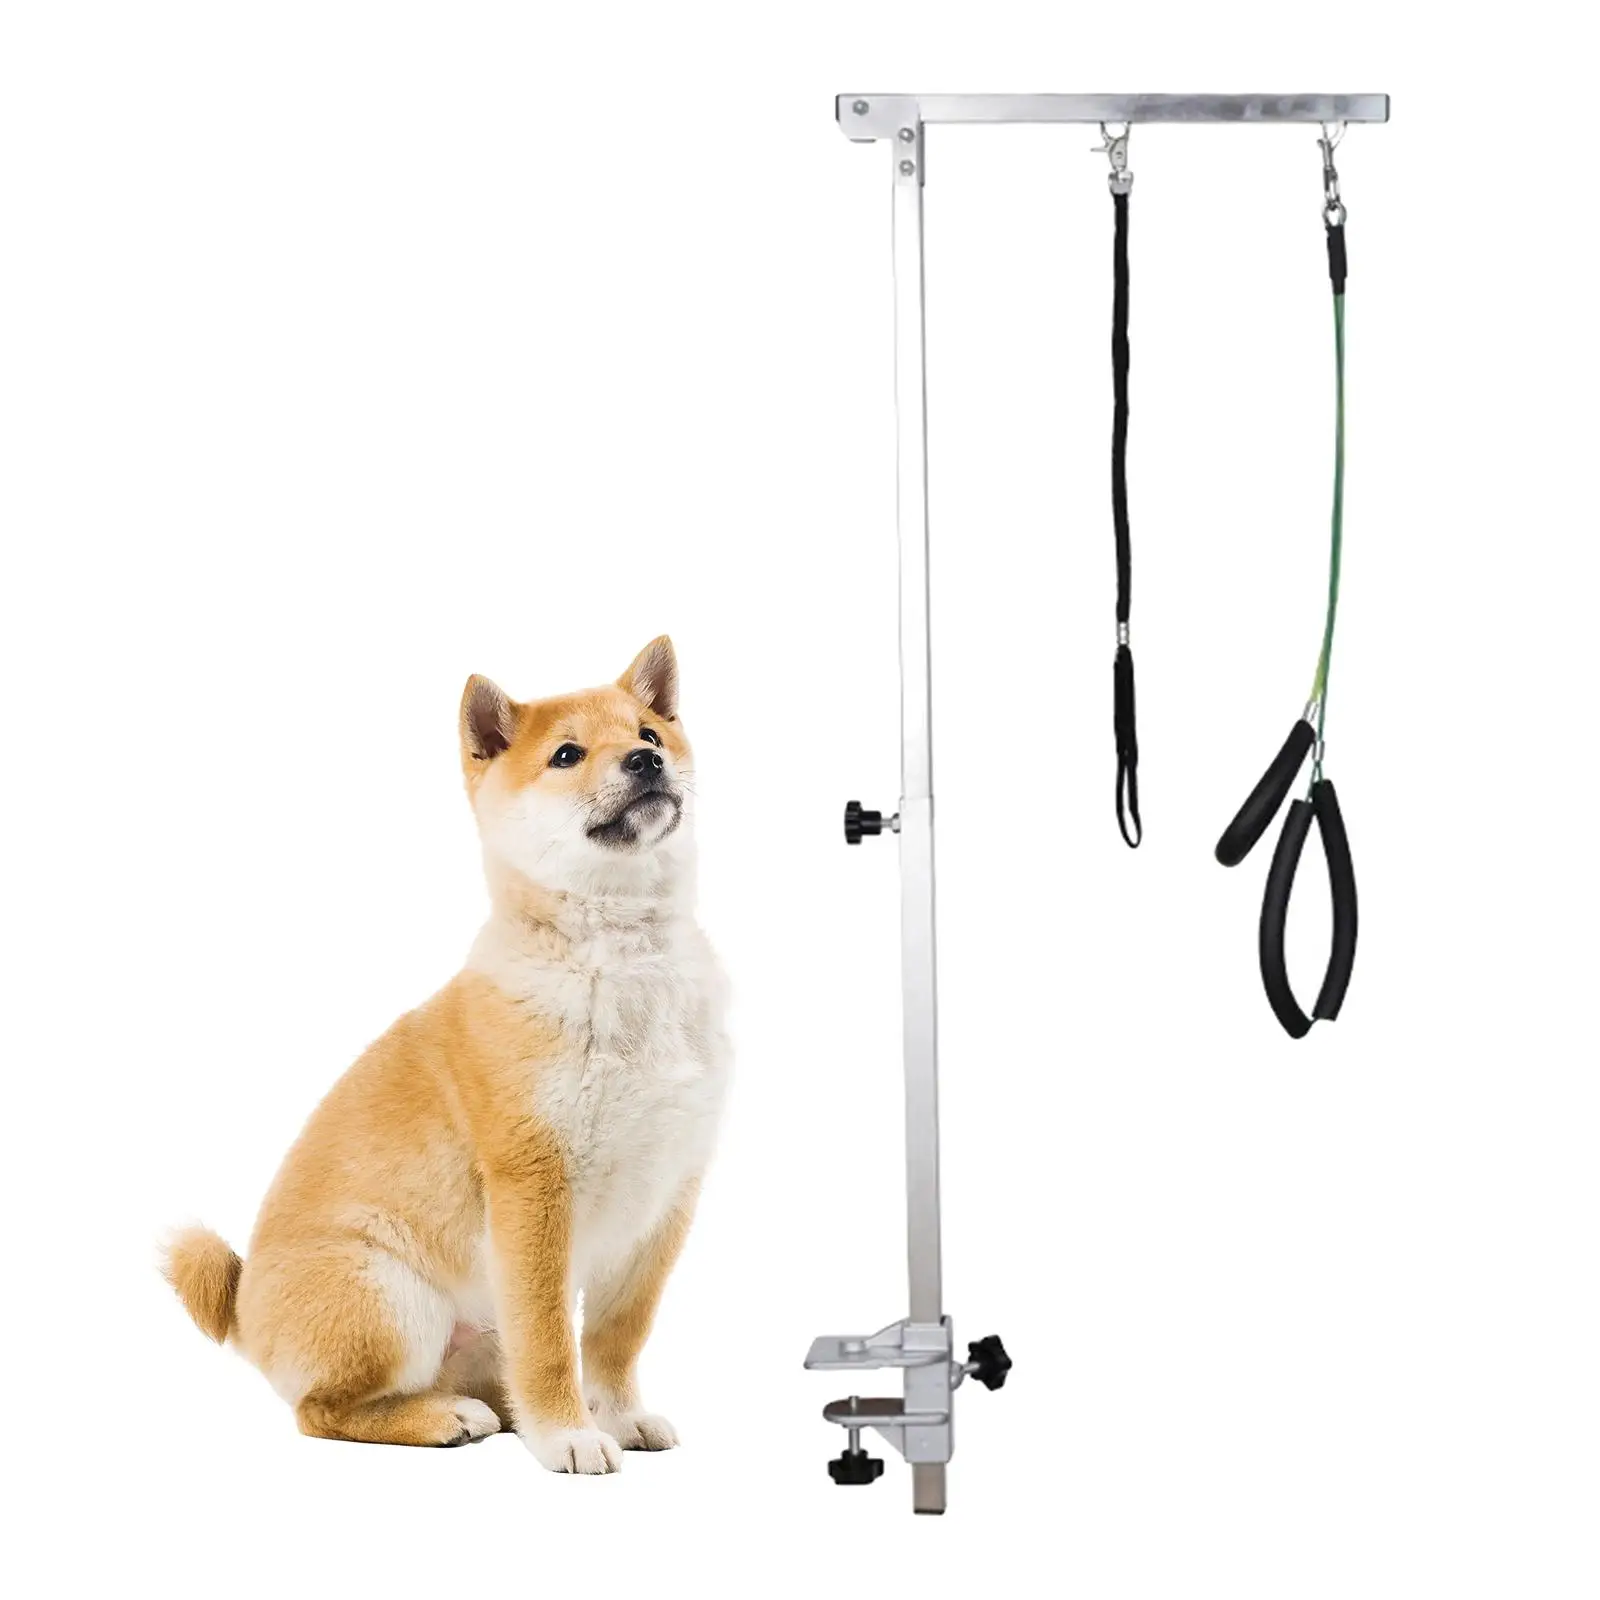 Pet Dog Grooming Arm Pet Grooming Arm Tool with Clamps Loop Noose Flexible Table Hanger Pet Grooming Arm with Clamp Professional